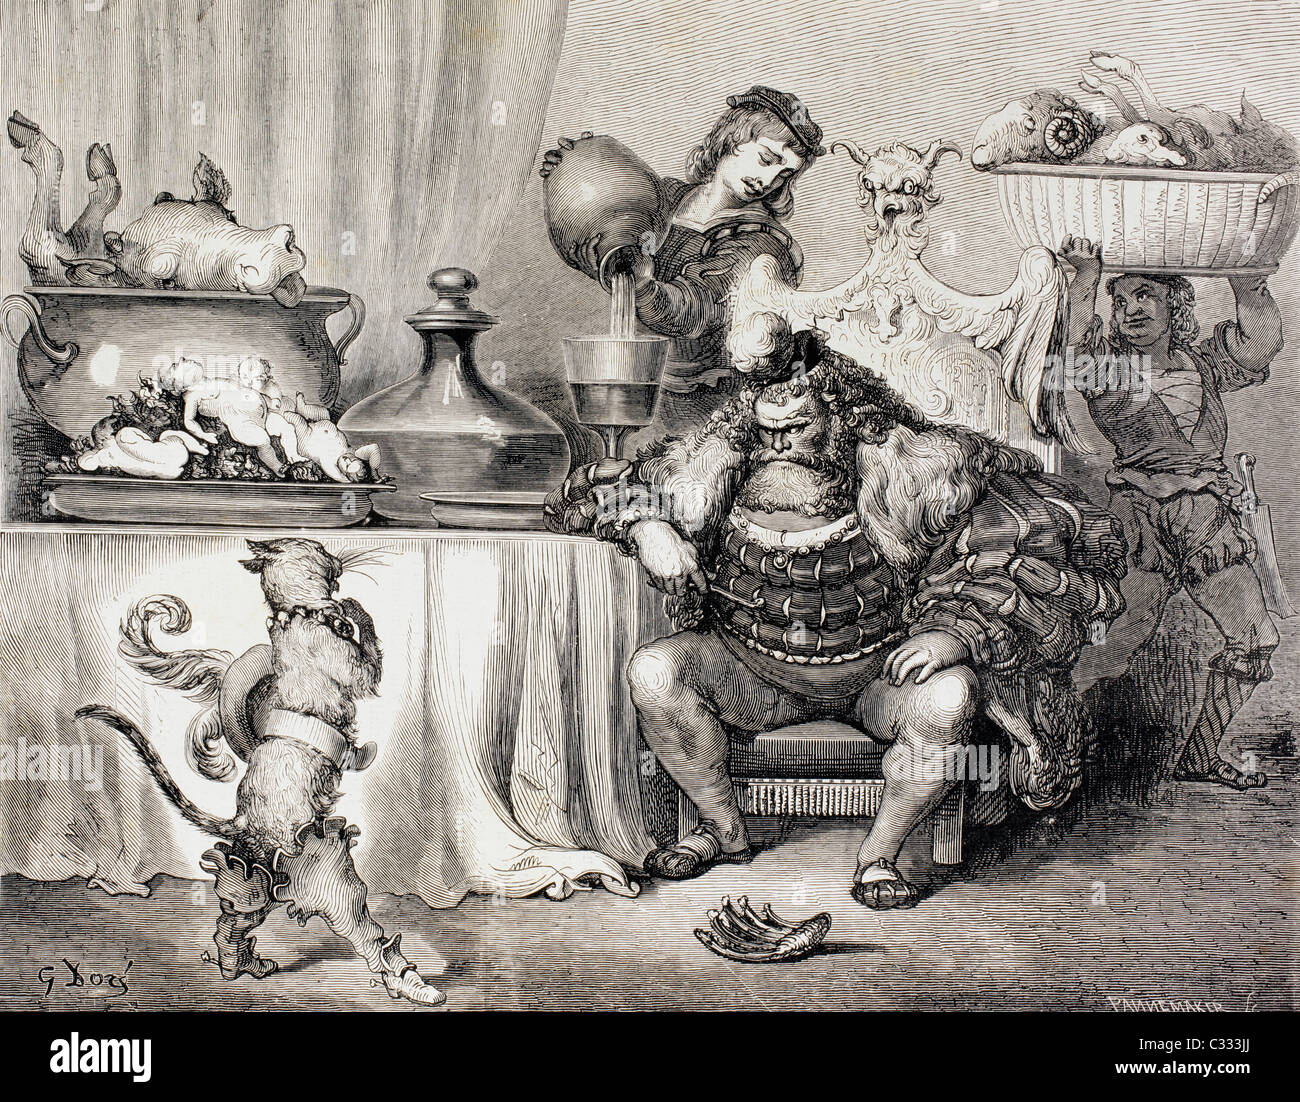 Scene from Puss in Boots by Charles Perrault. Puss meets the ogre. After a work by Gustave Dore. Stock Photo